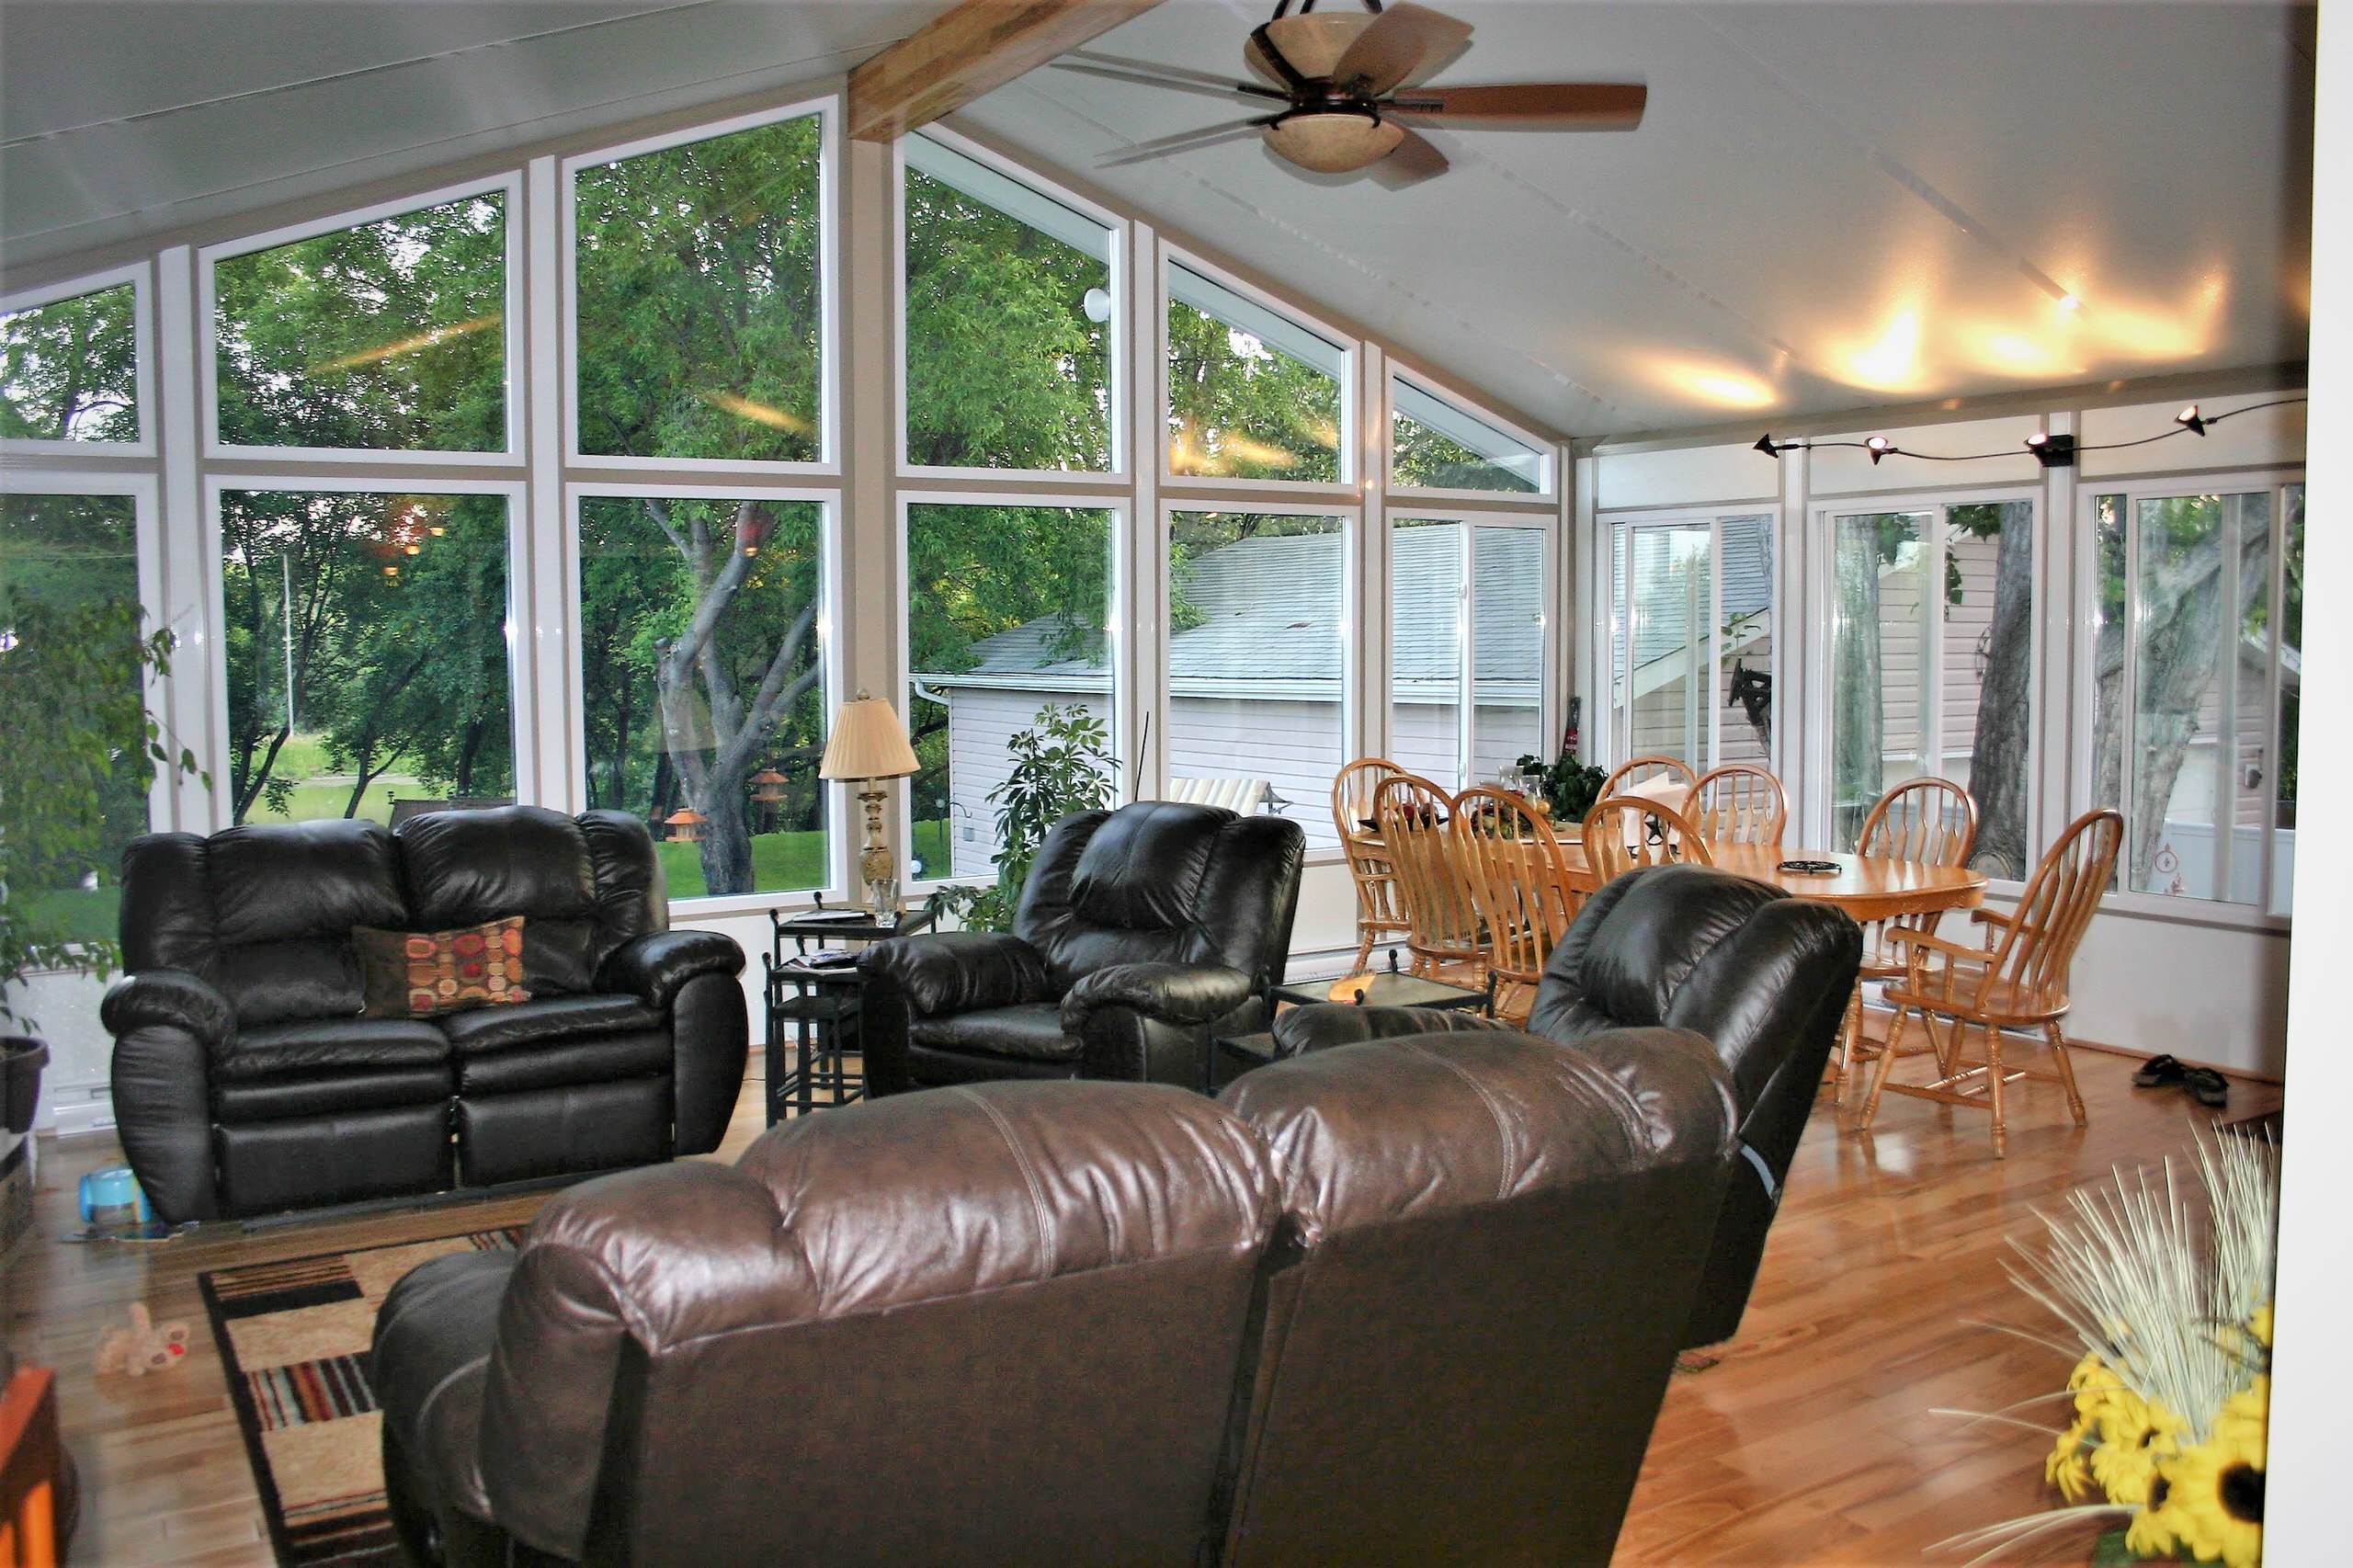 Sunroom Model 400 Insulated 4 Season with Gabel Roof